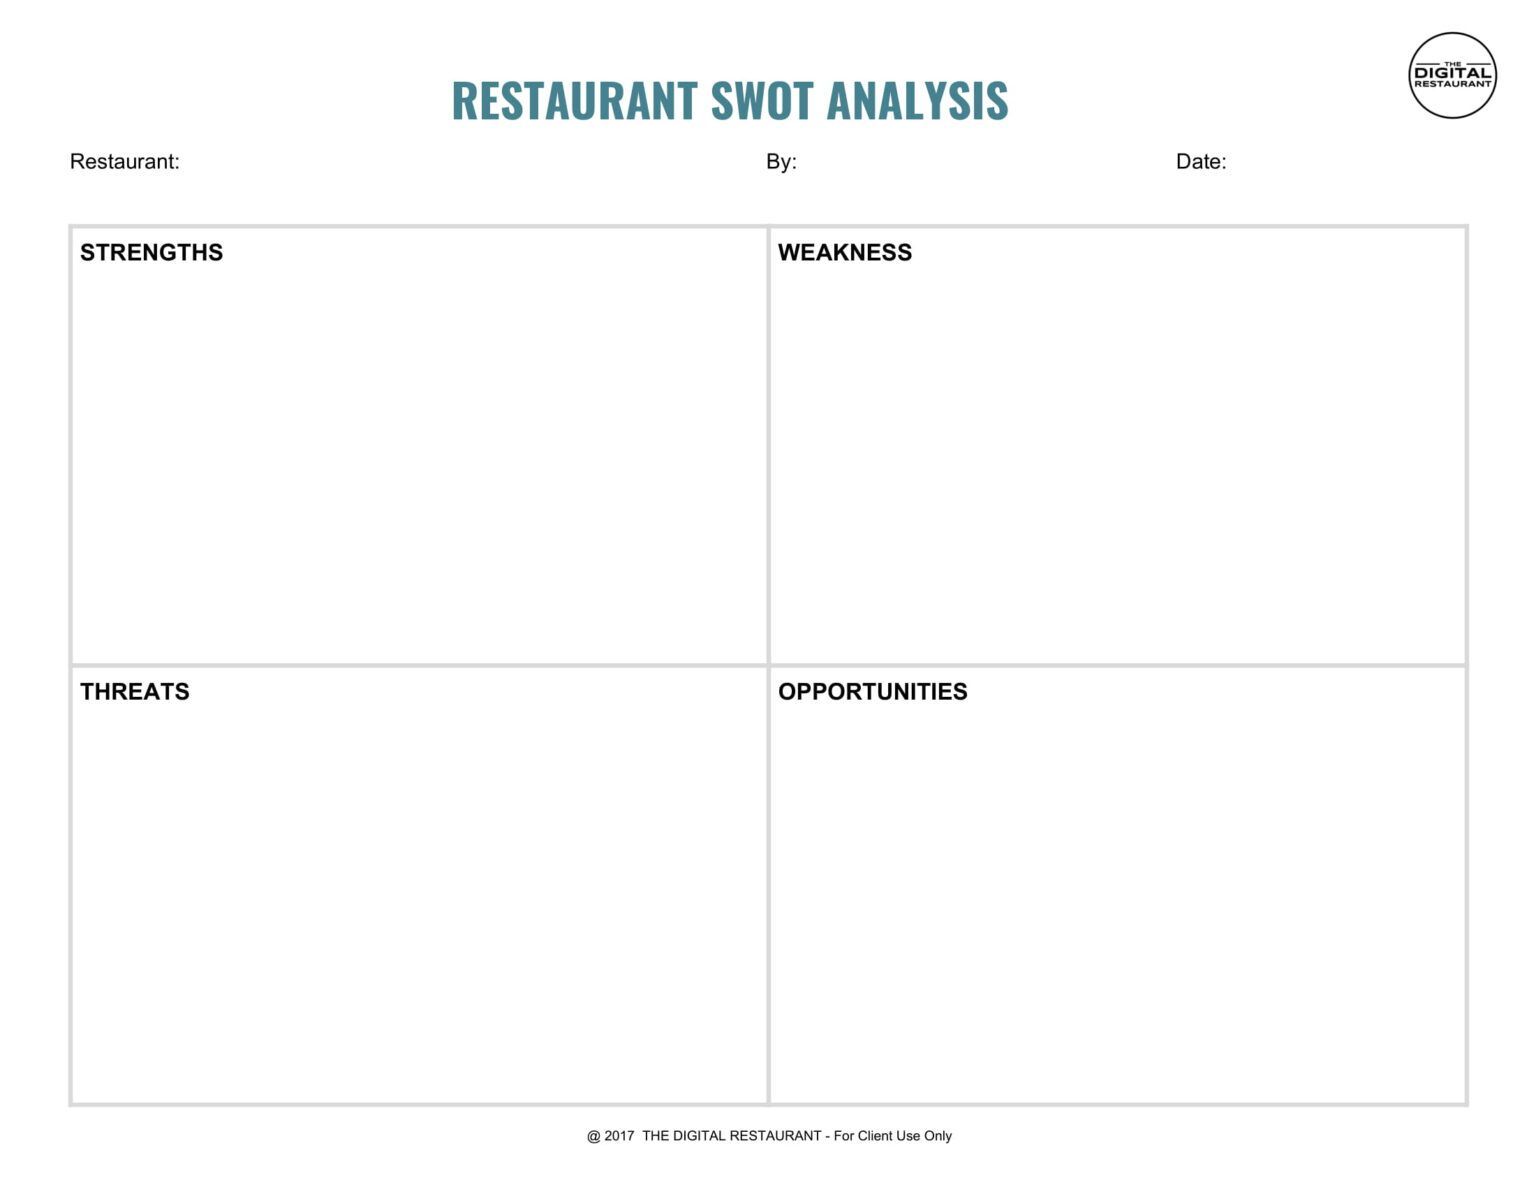 12 Restaurant Swot Analysis Examples Pdf Word Pages Intended For Swot Template For Word Great Pro Swot Analysis Examples Swot Analysis Swot Analysis Template